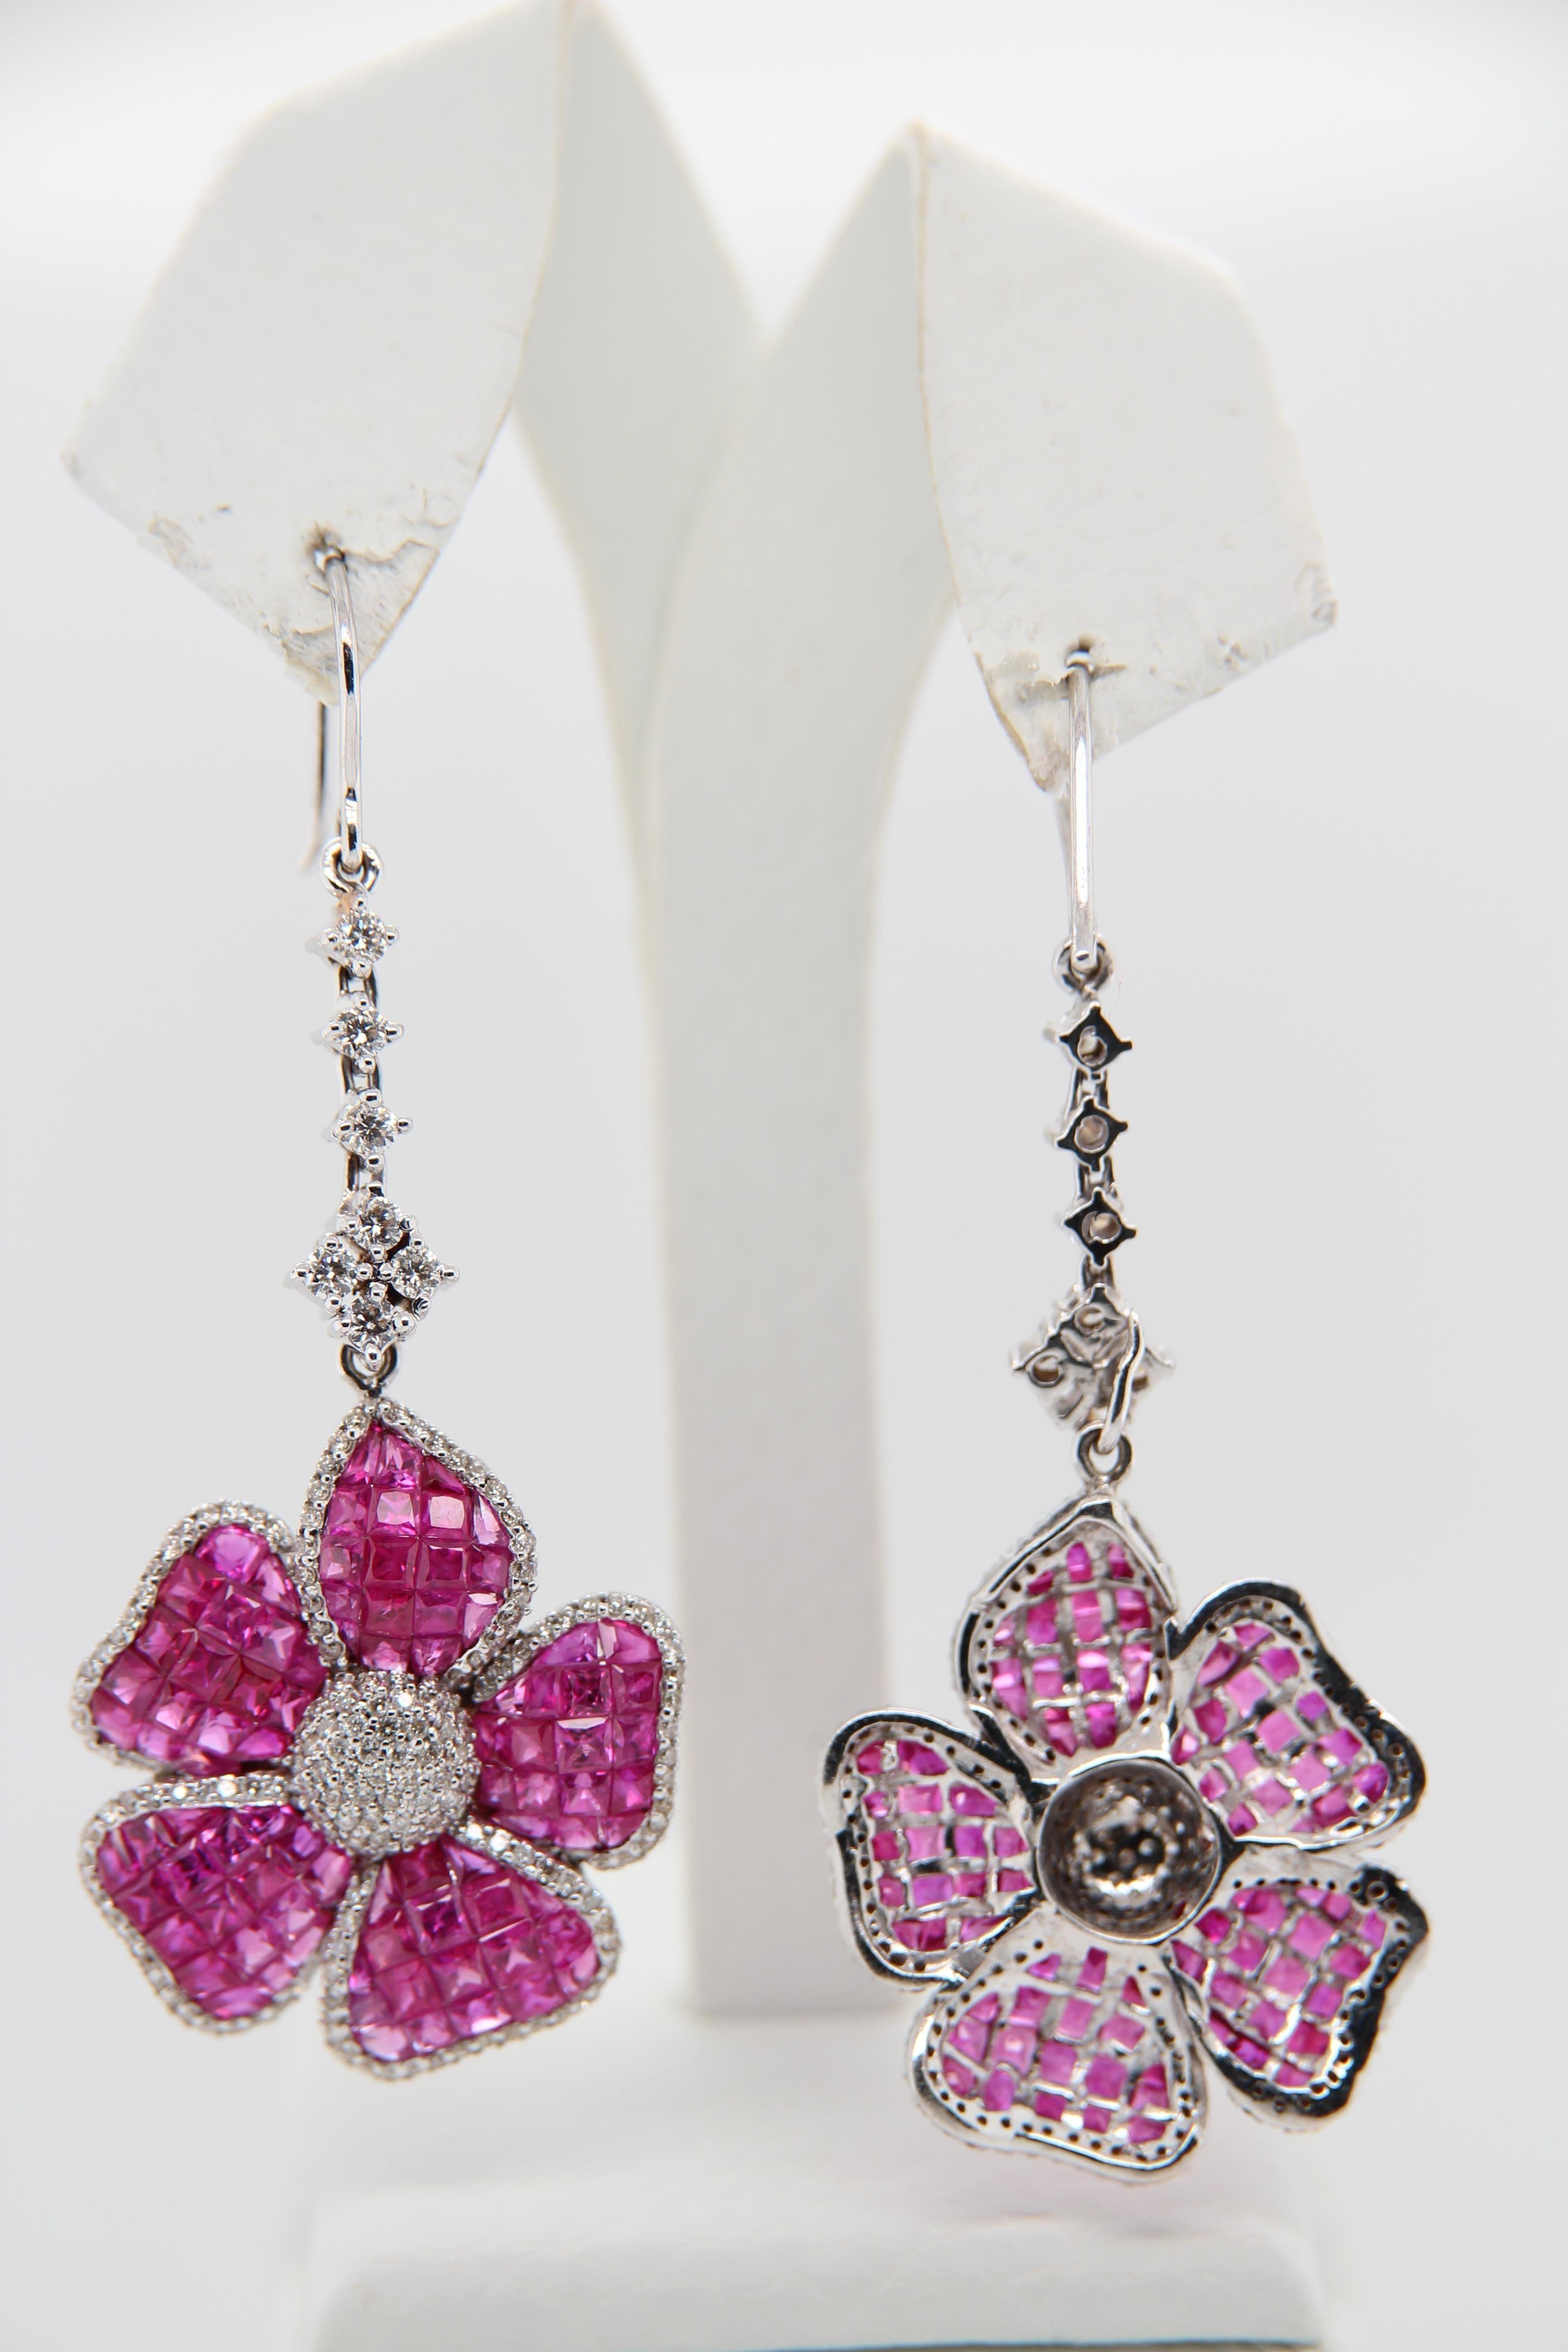 A ruby and diamond earring. The earring is studded with 12.30 carat rubies and 3.37 carat diamonds. It is made in 18 karat white gold 12.90 gross weight.